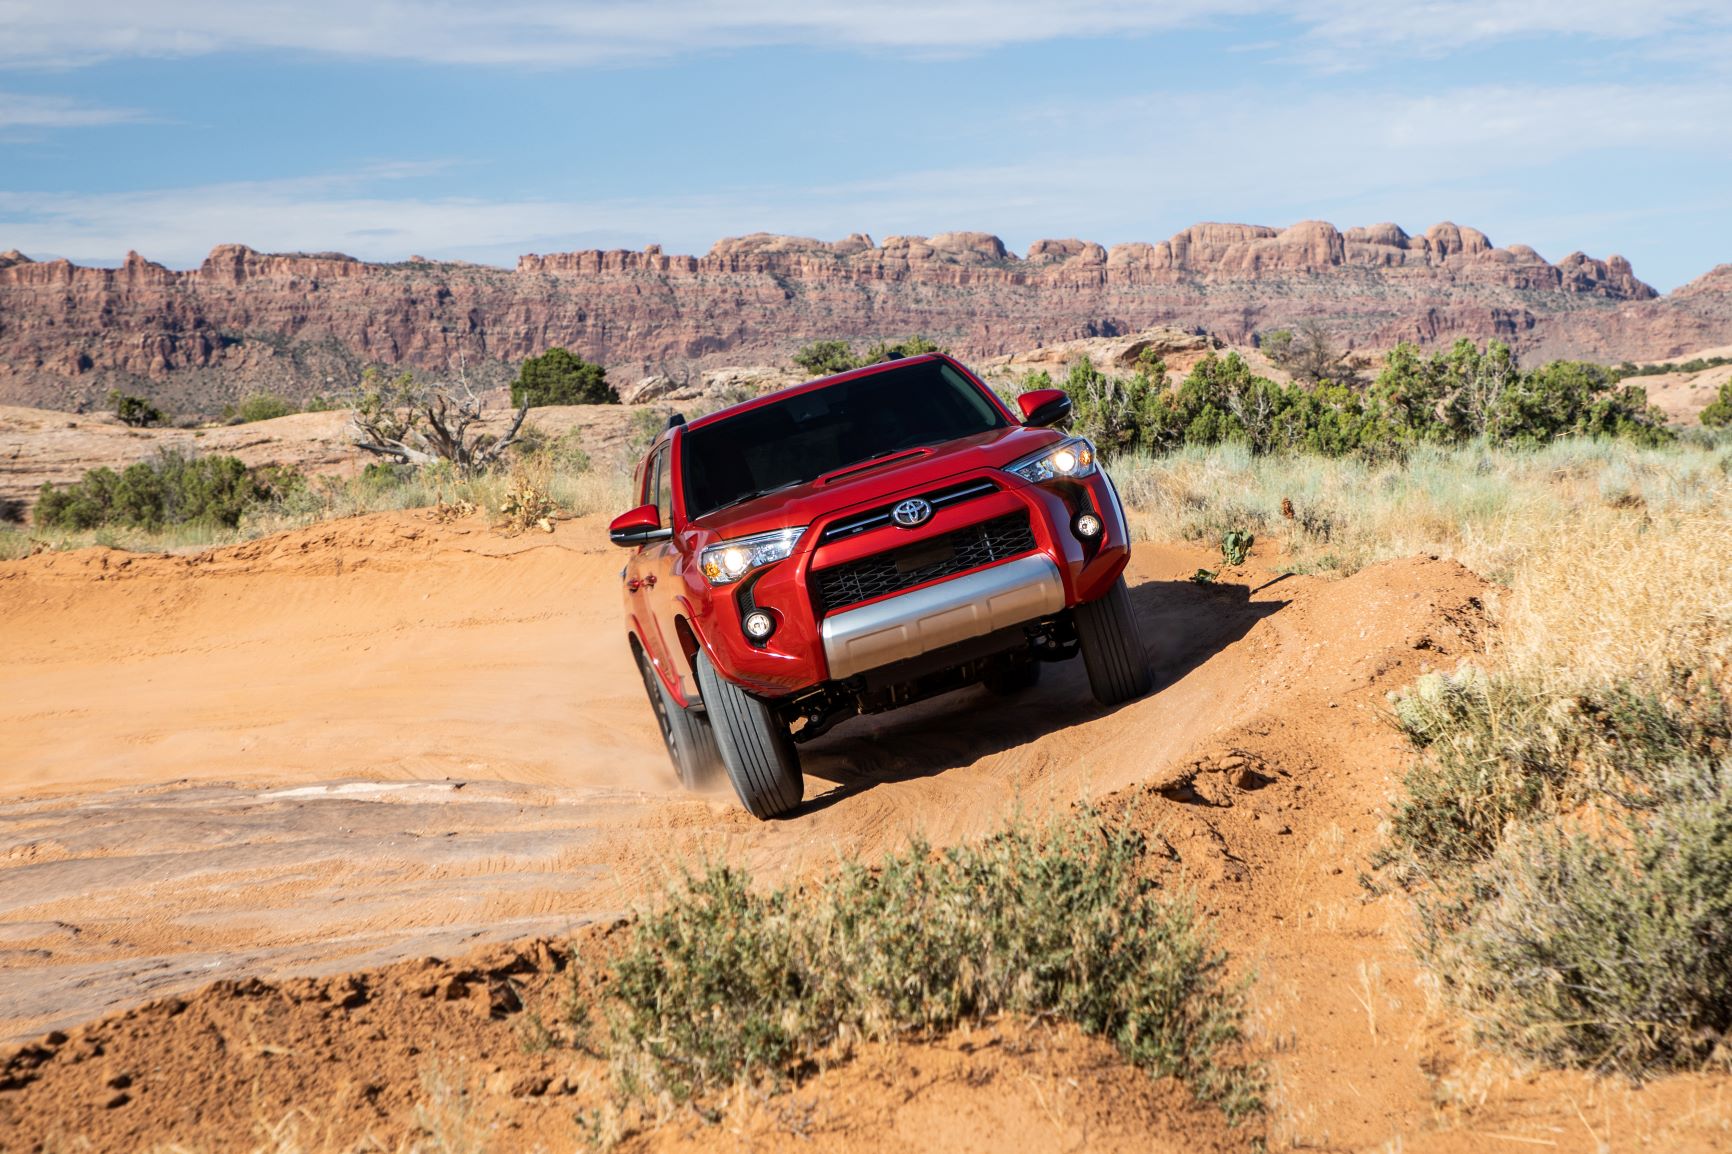 2020 TRD Off-Road Barcelona Red (Buyers Guide)